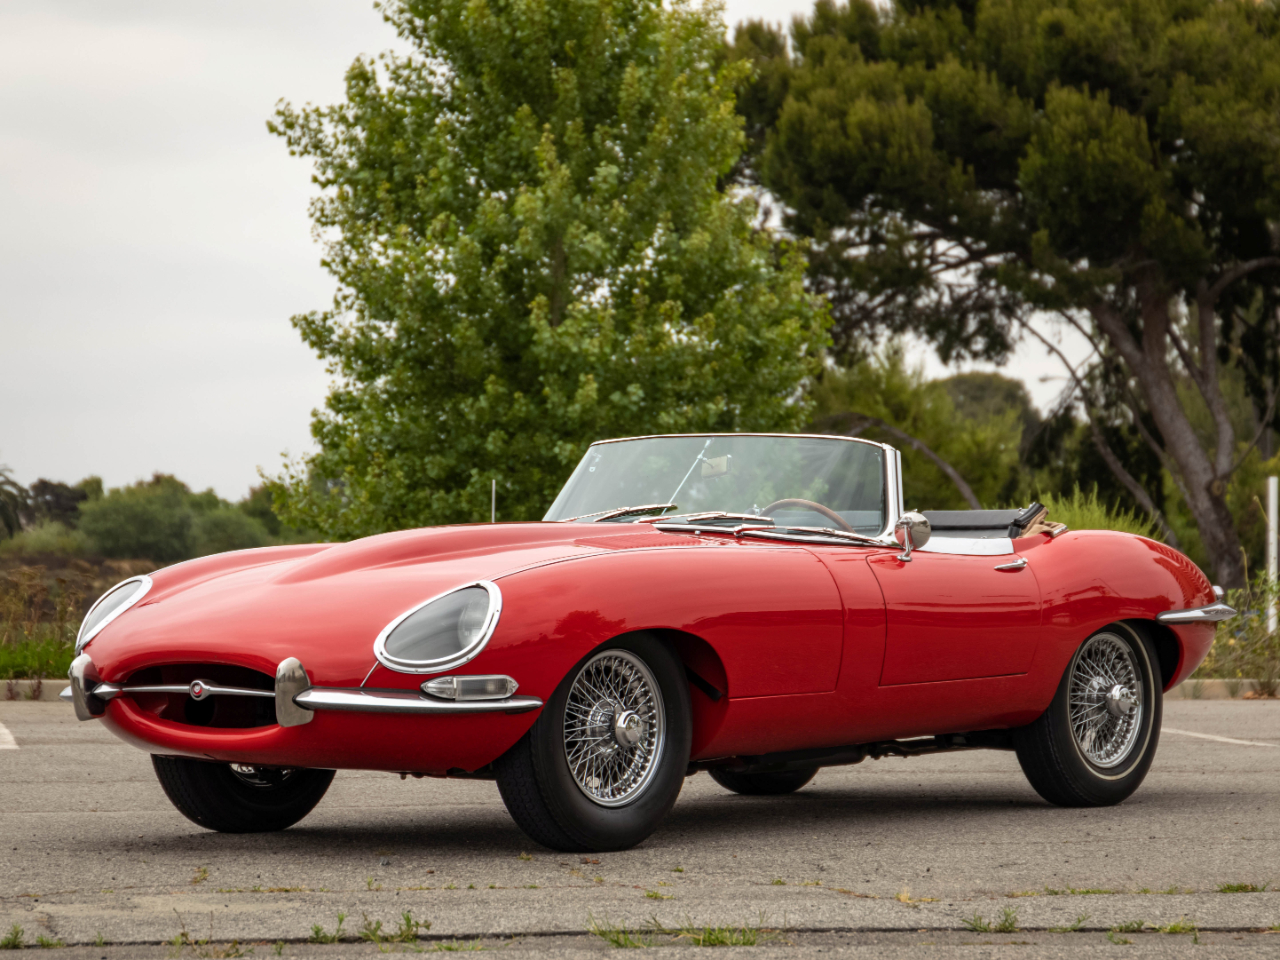 Used 1967 Jaguar E Type Series I 4 2 Roadster For Sale In Marina Del Rey Ca 90292 Chequered Flag International